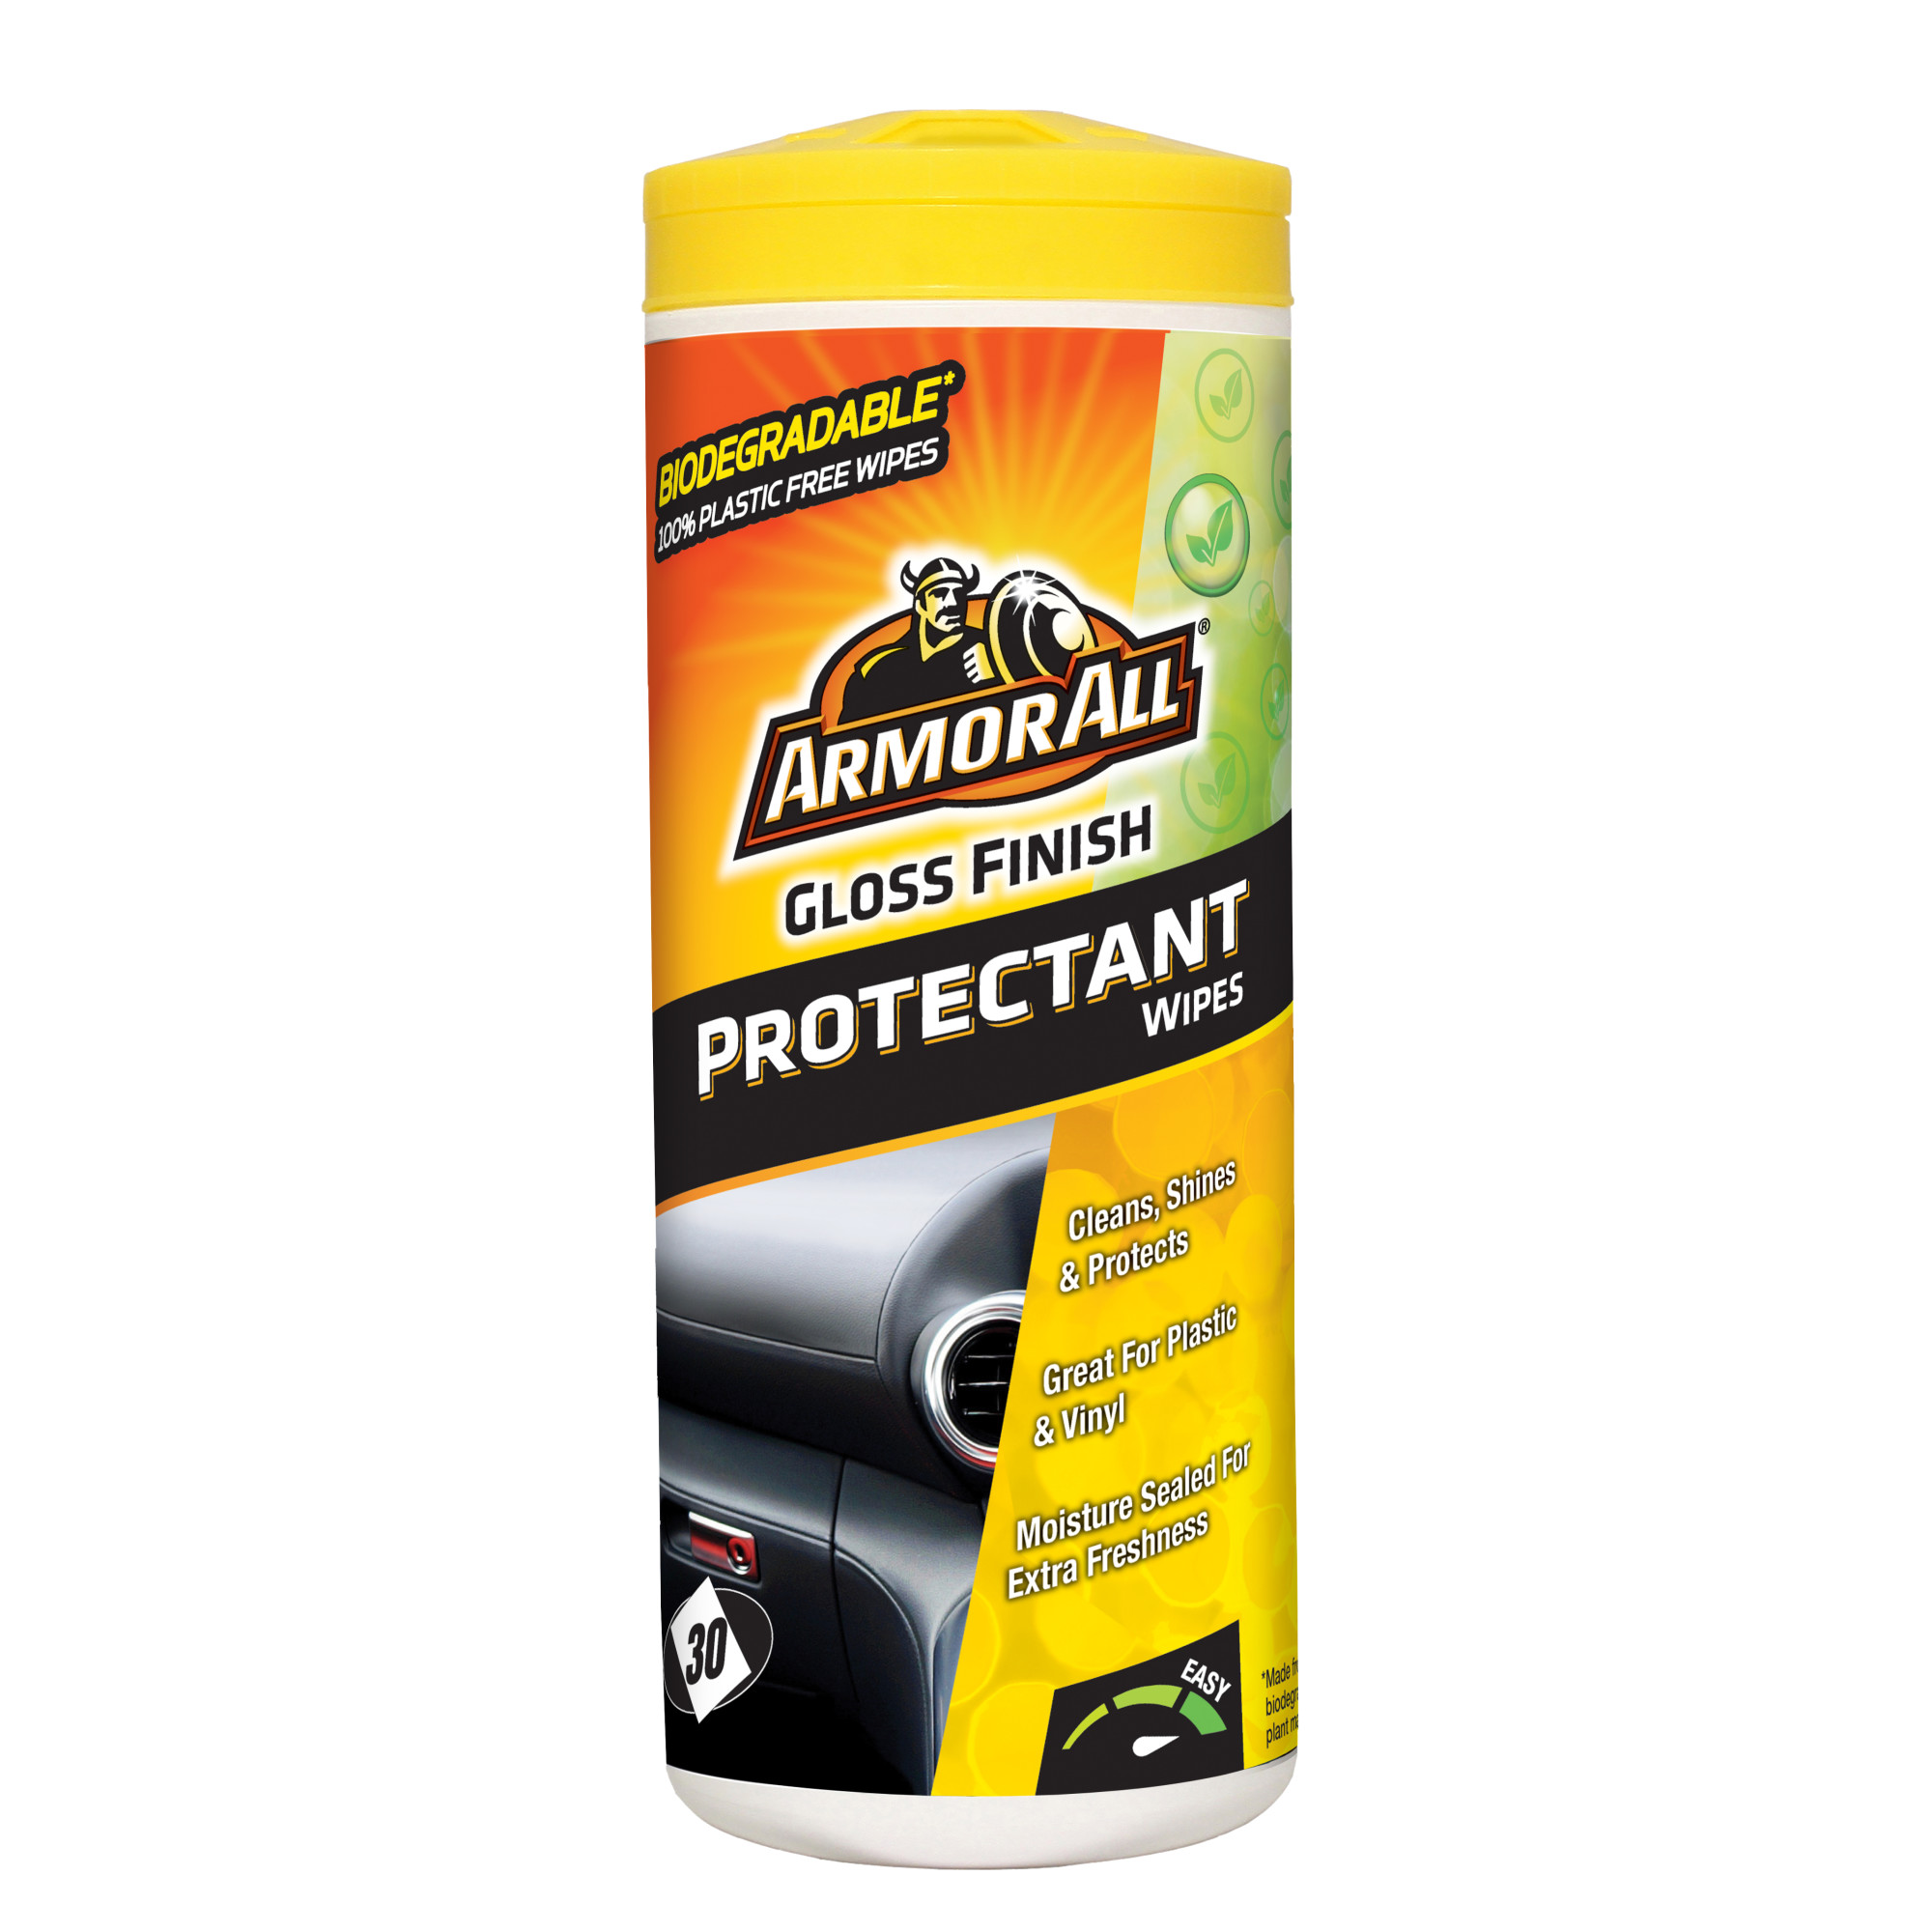 Armor All Gloss Finish Protectant Wipes, 30 Pack - E303296800